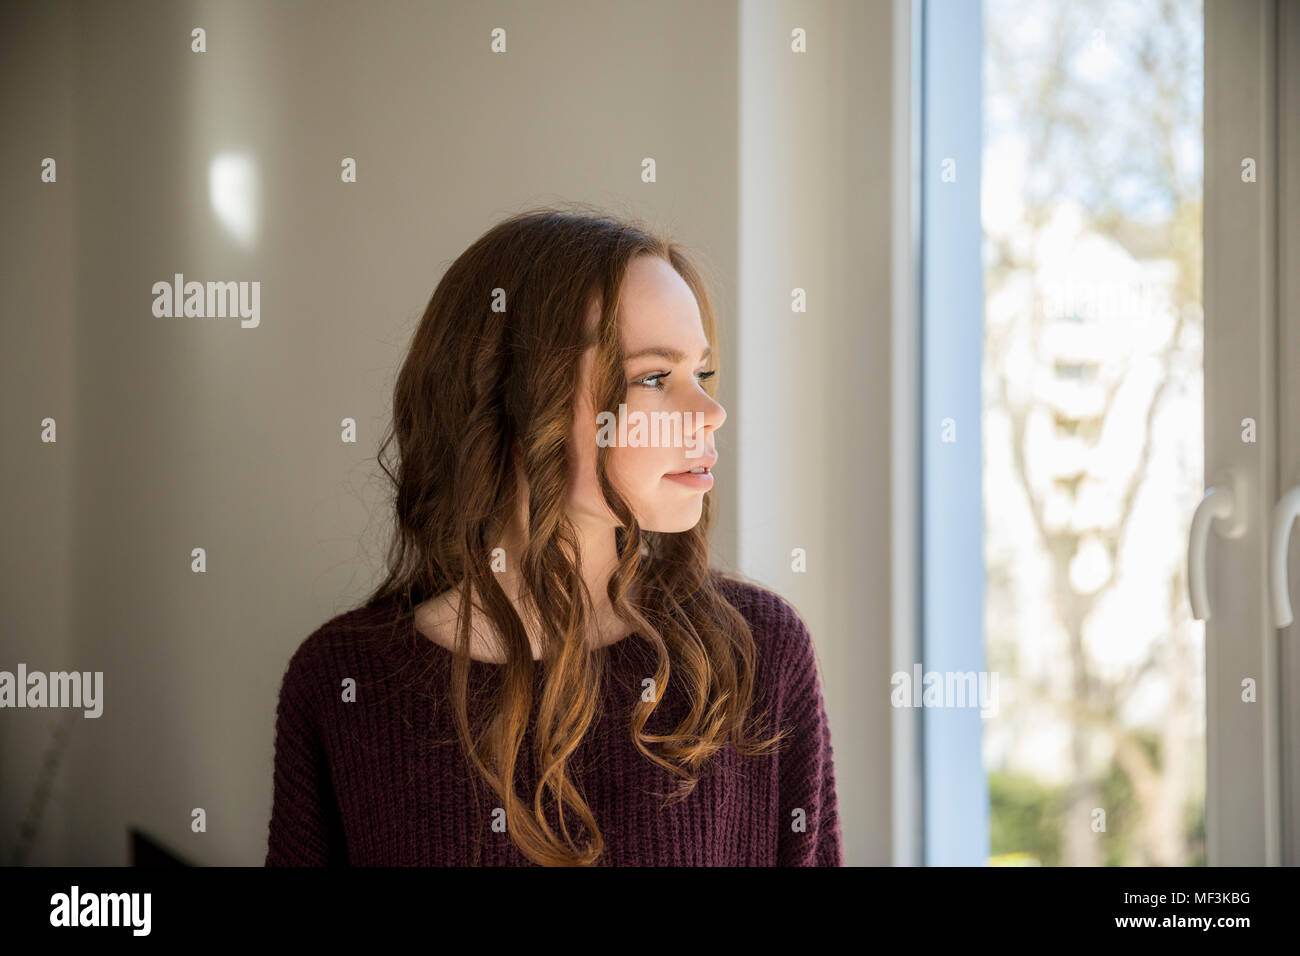 Teenage girl looking out of window, daydreaming Stock Photo